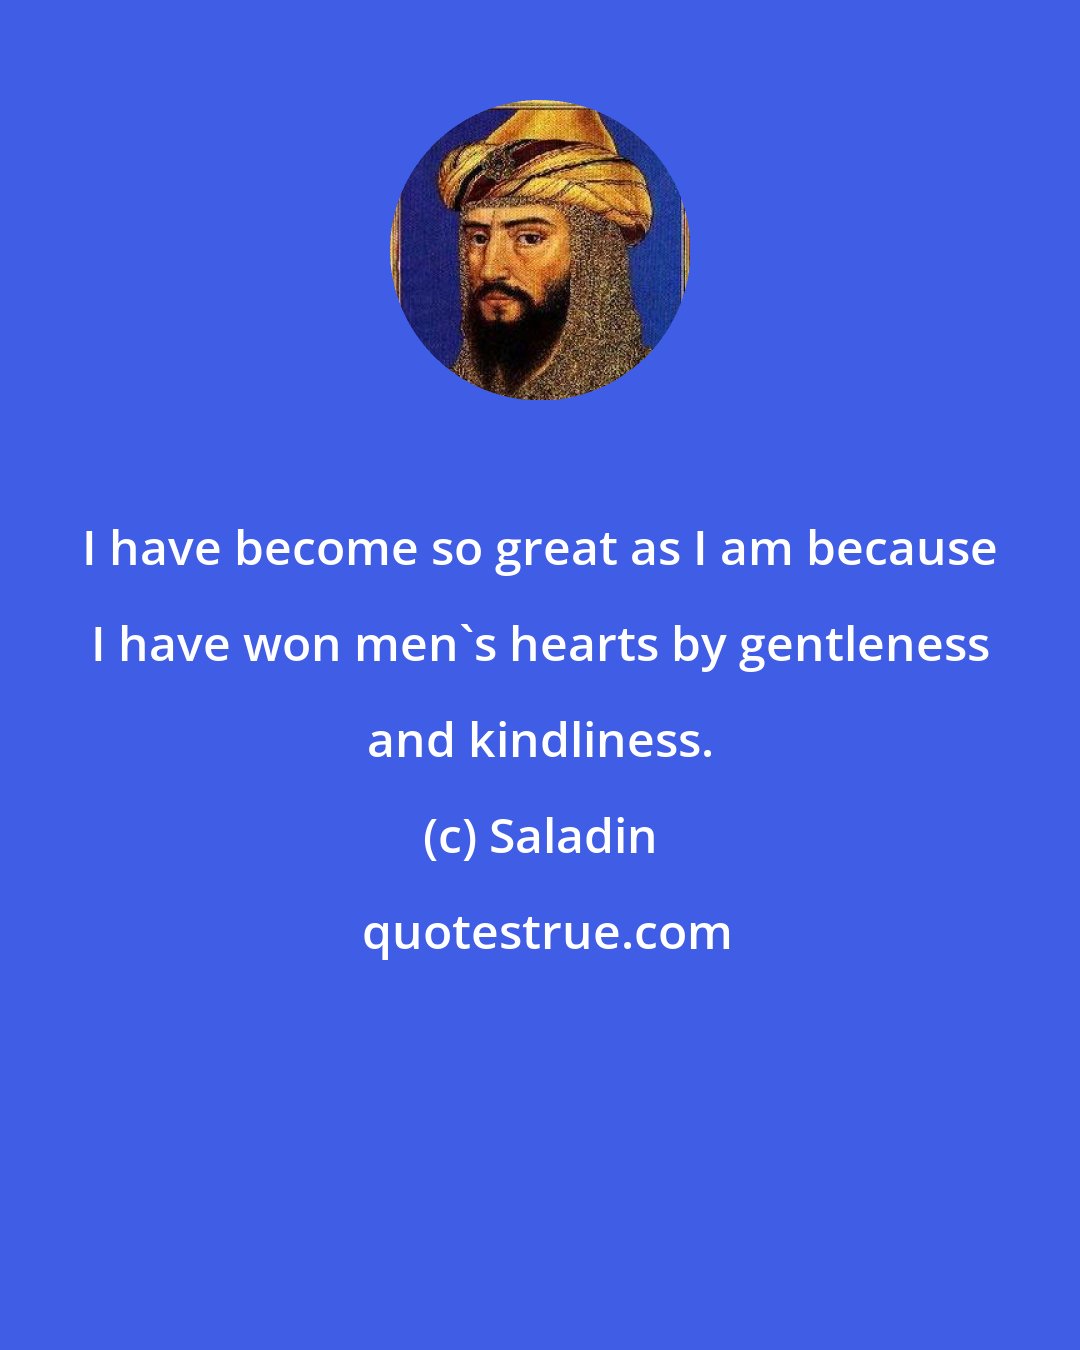 Saladin: I have become so great as I am because I have won men's hearts by gentleness and kindliness.